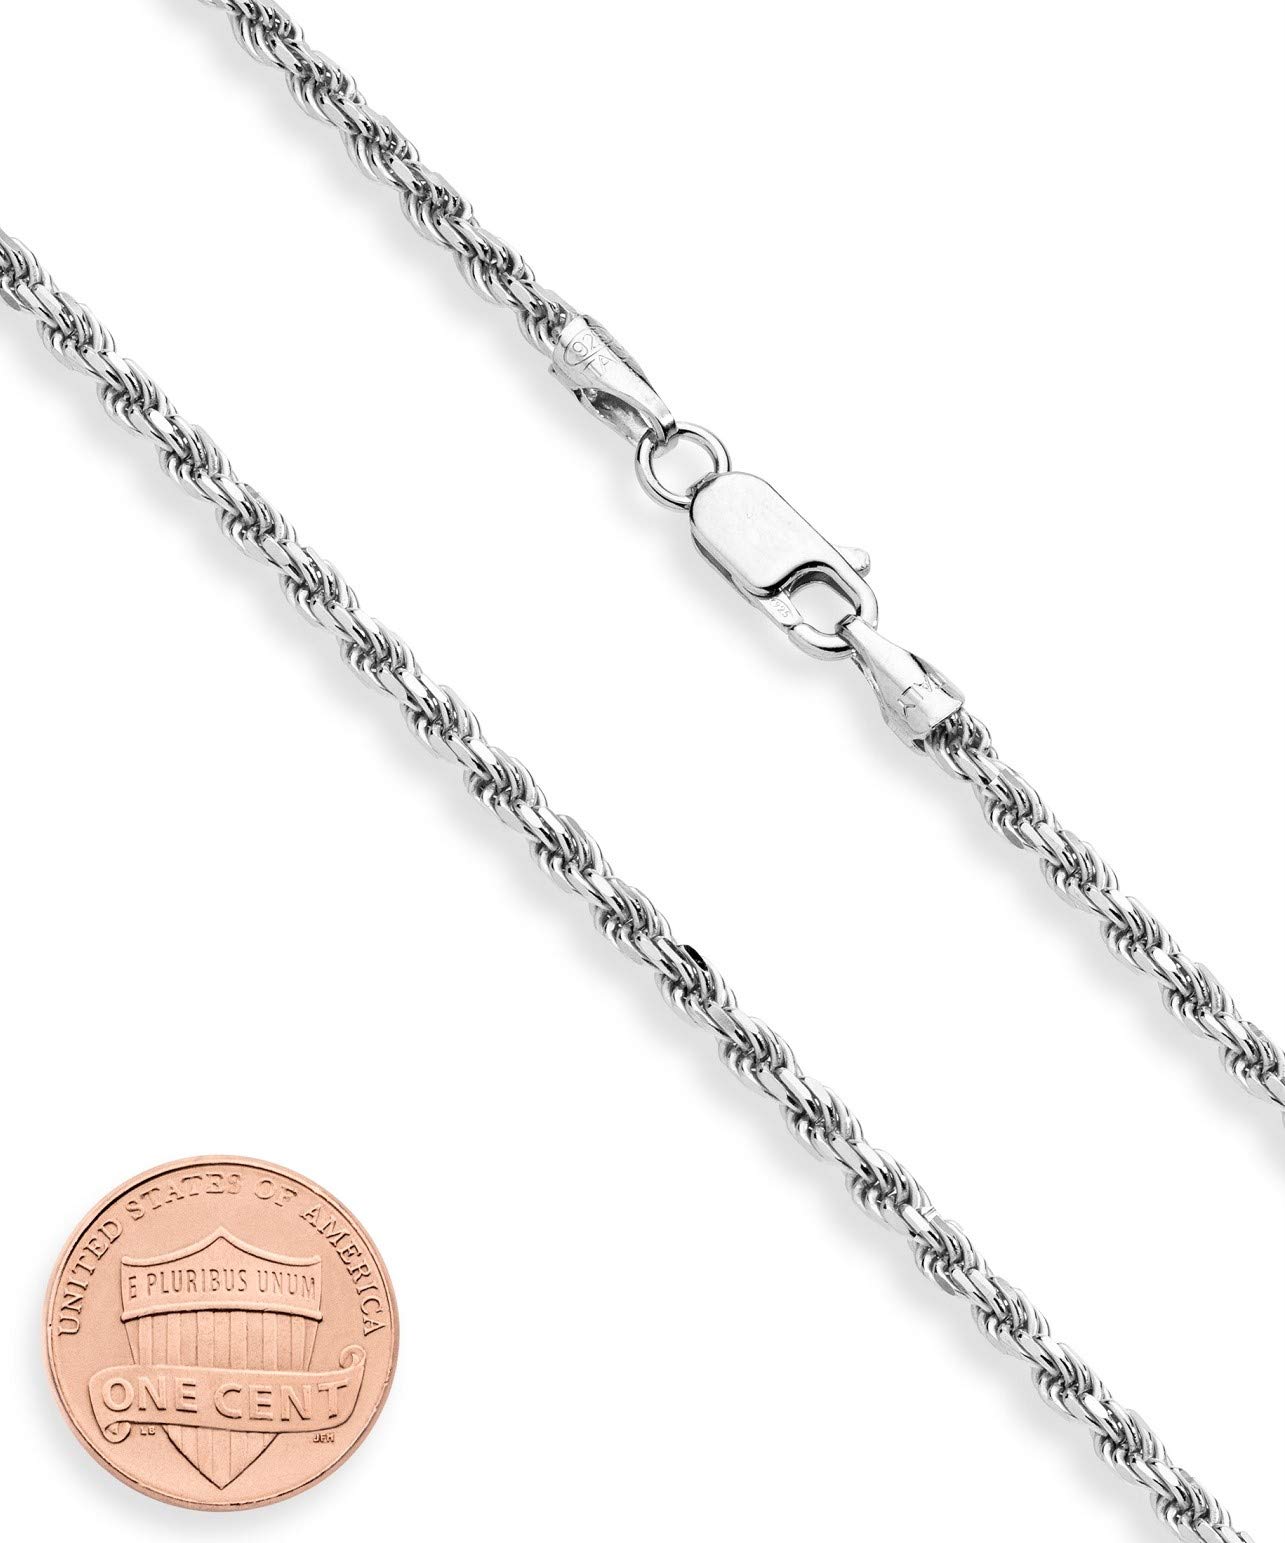 Miabella Solid 925 Sterling Silver Italian 2mm, 3mm Diamond-Cut Braided Rope Chain Necklace for Men Women, 925 Sterling Silver Made in Italy